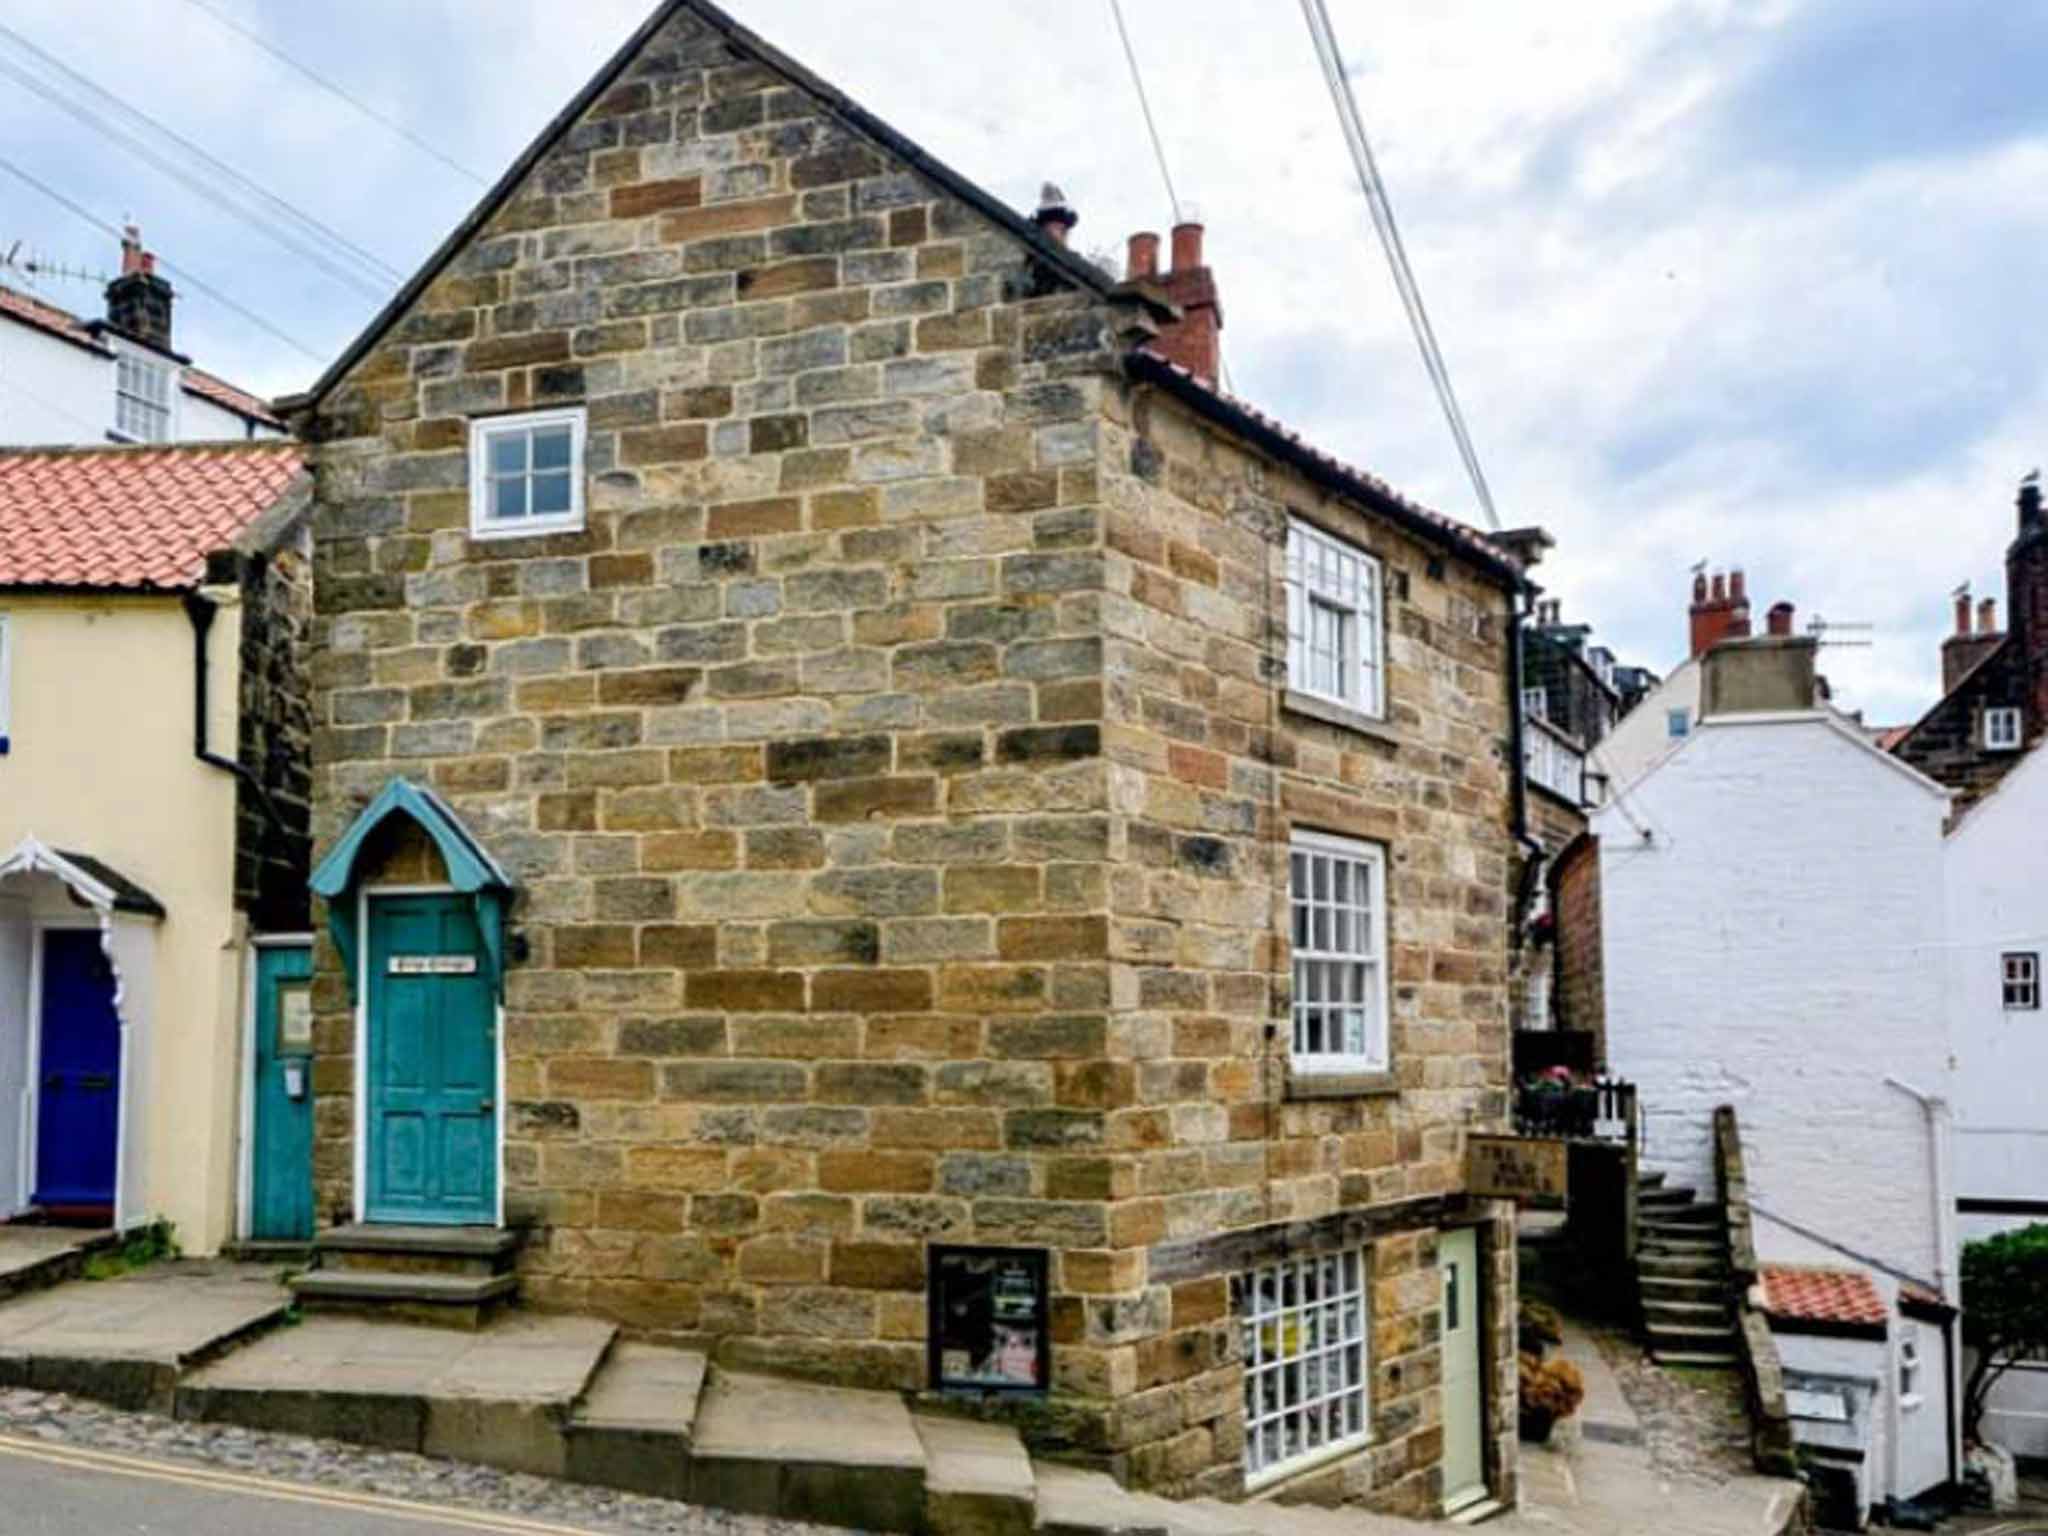 Currently in use as a holiday let, this attractive one bedroom cottage in Robin Hood’s Bay, Whitby, Yorkshire, was originally a blacksmith’s forge. It is on the market for £187,000 (including all contents, beds, washing machine, etc) with eMoov